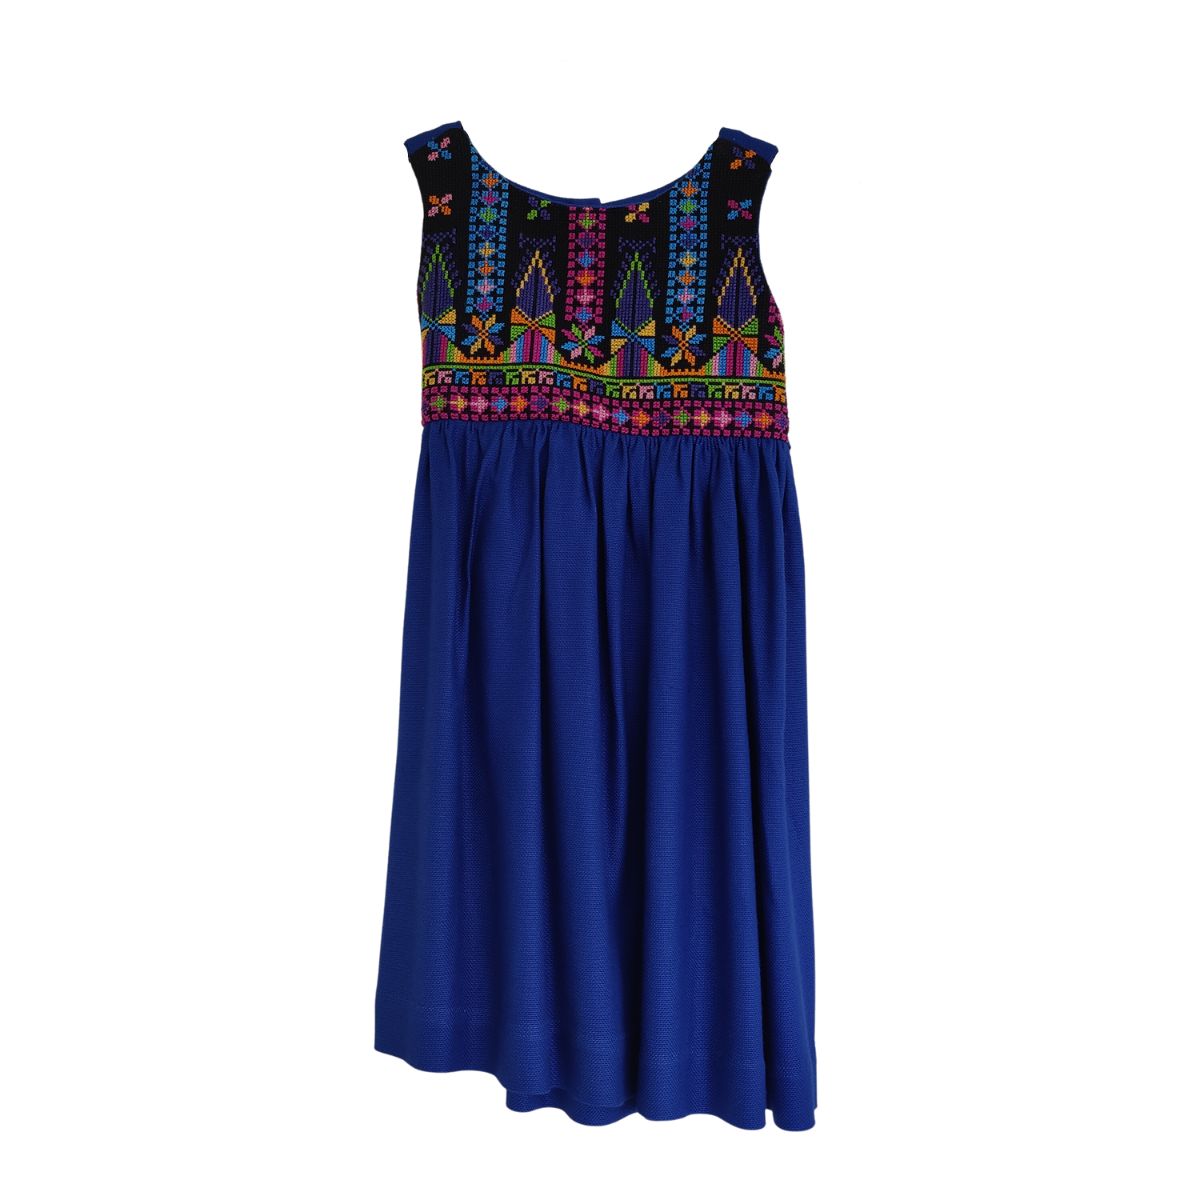 Embroidered Dress from Gaza (Blue)